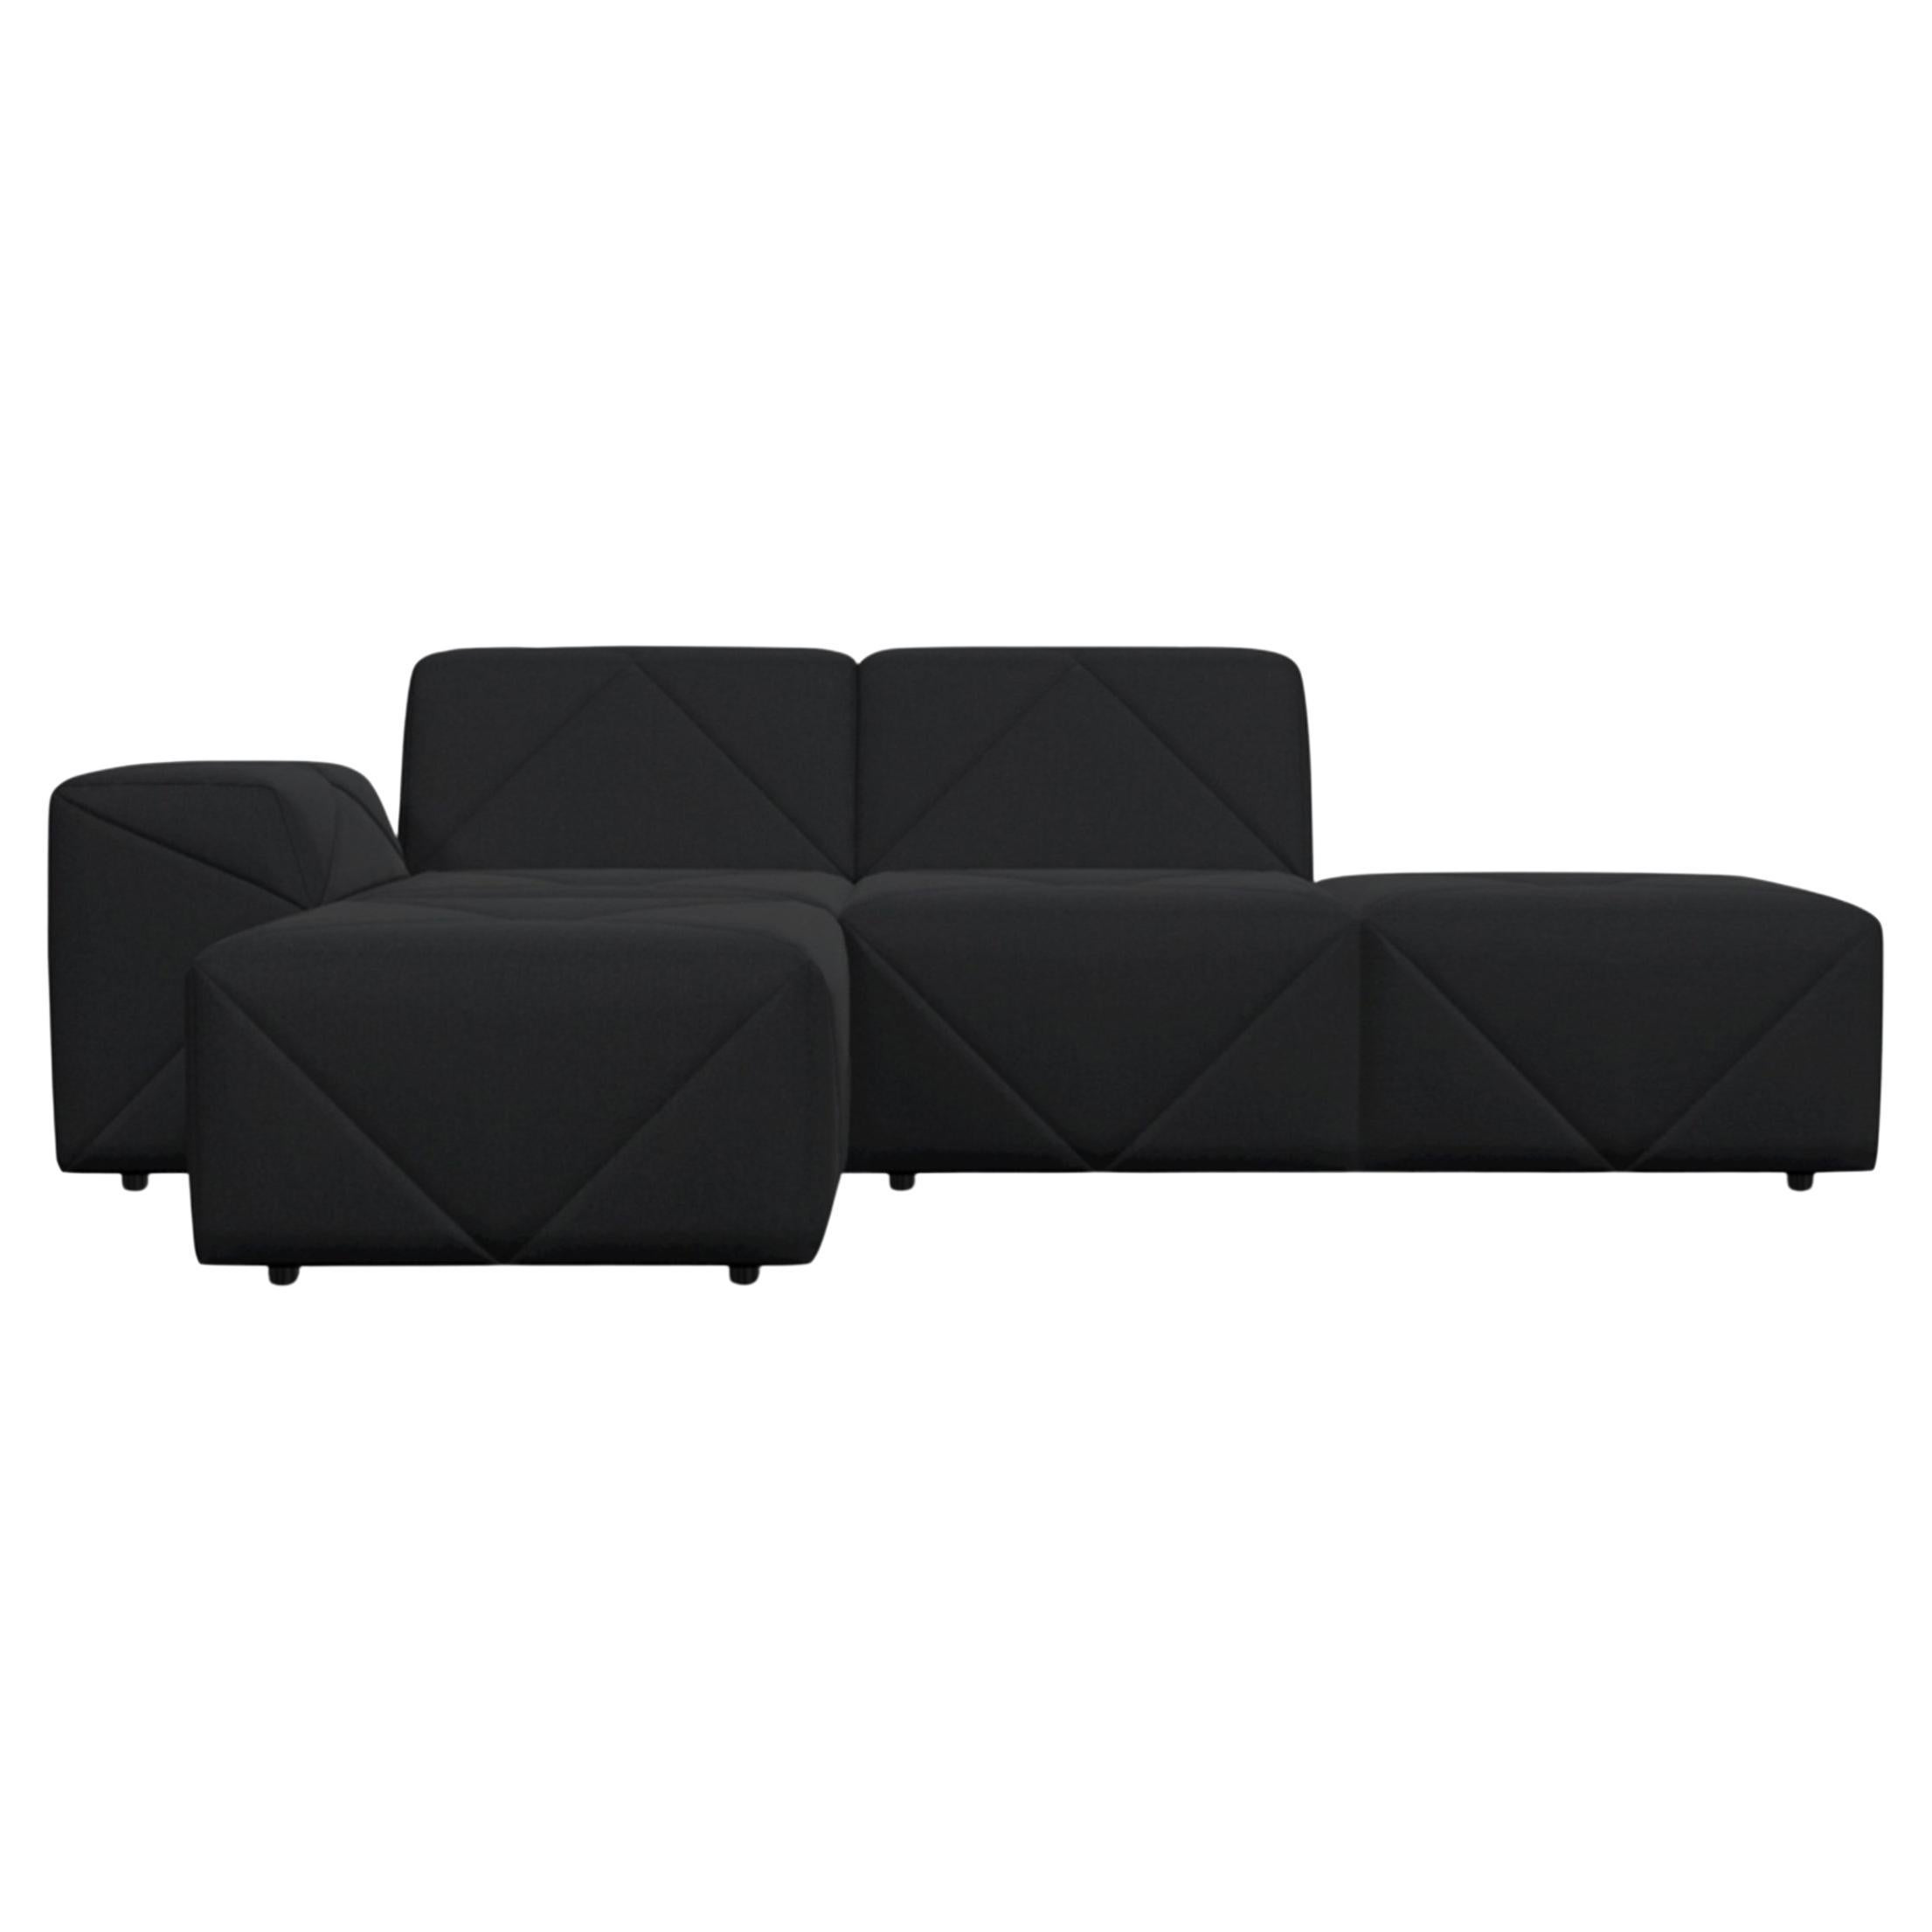 Moooi BFF Left Arm Chaise Longue Sofa in Justo, Bazalt Upholstery For Sale